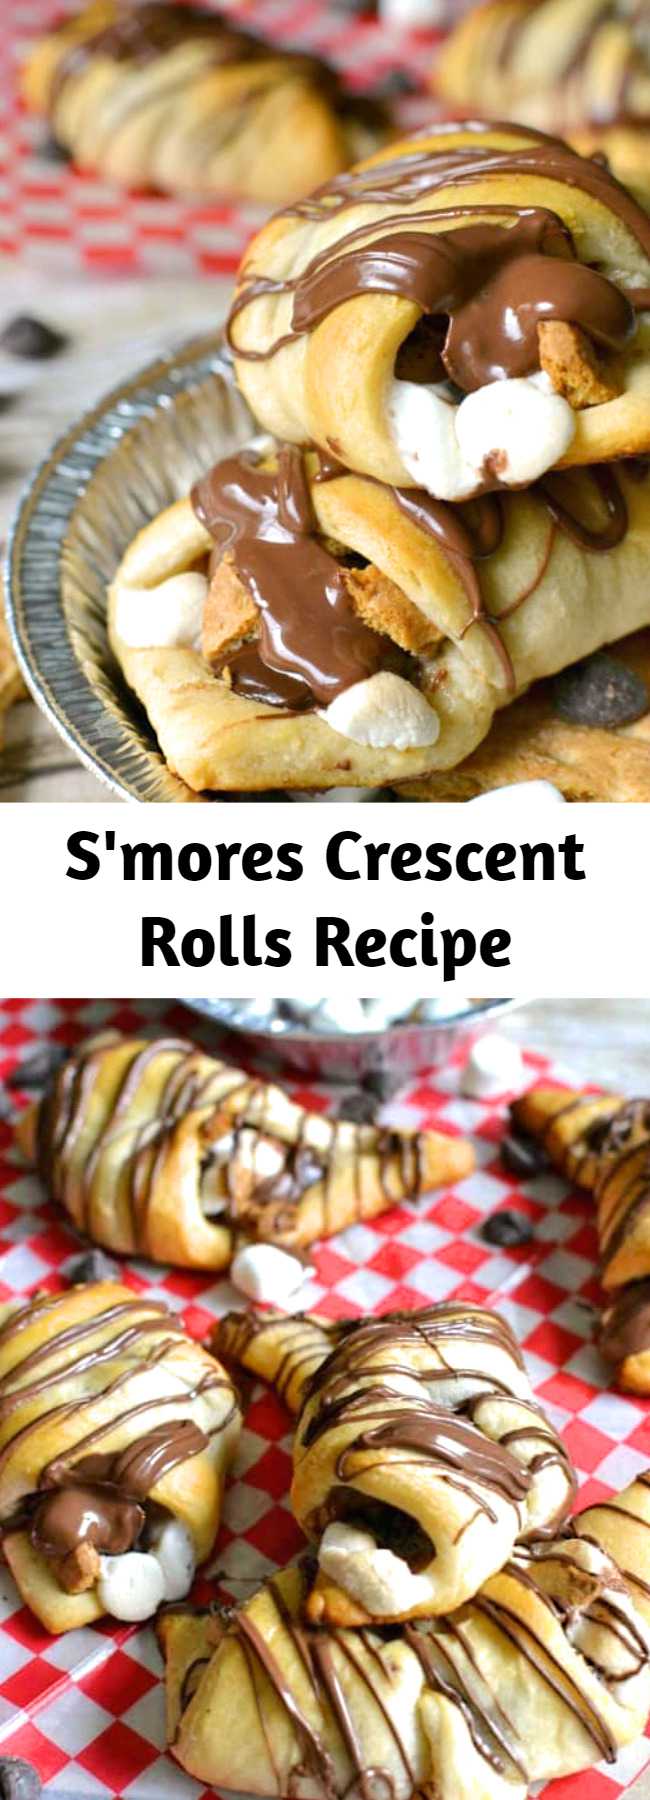 S'mores Crescent Rolls stuffed with chocolate chips, marshmallows, graham crackers and Nutella and topped with Nutella drizzle. Our favorite new way to enjoy s'mores!